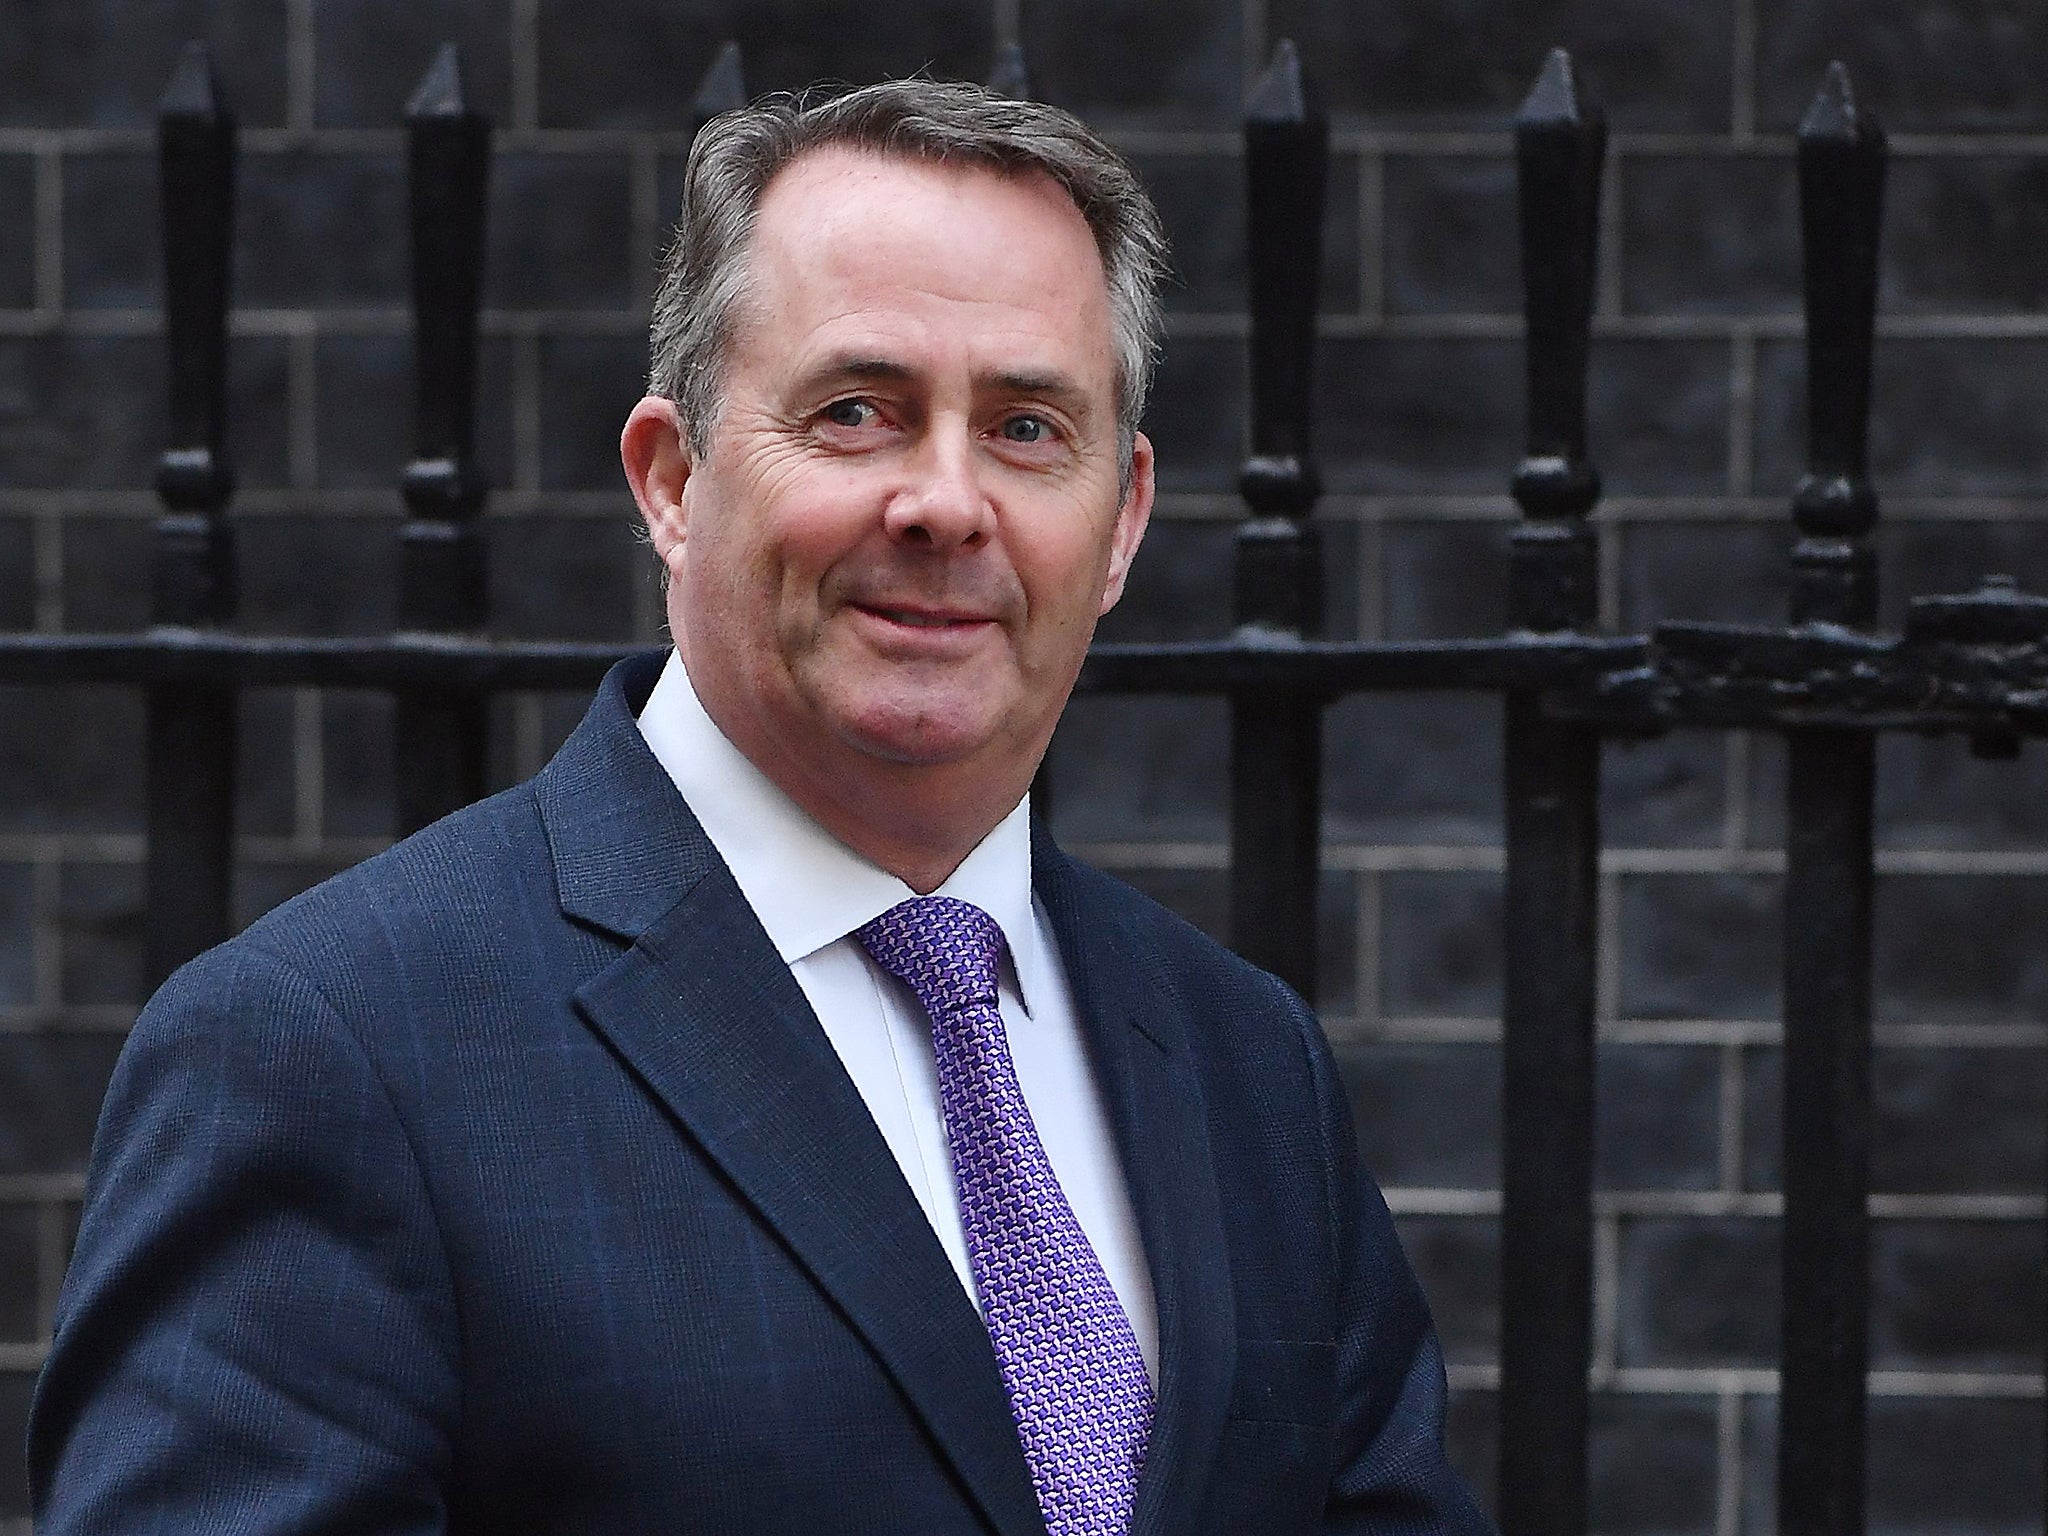 Dr Liam Fox answered an emergency request for a doctor